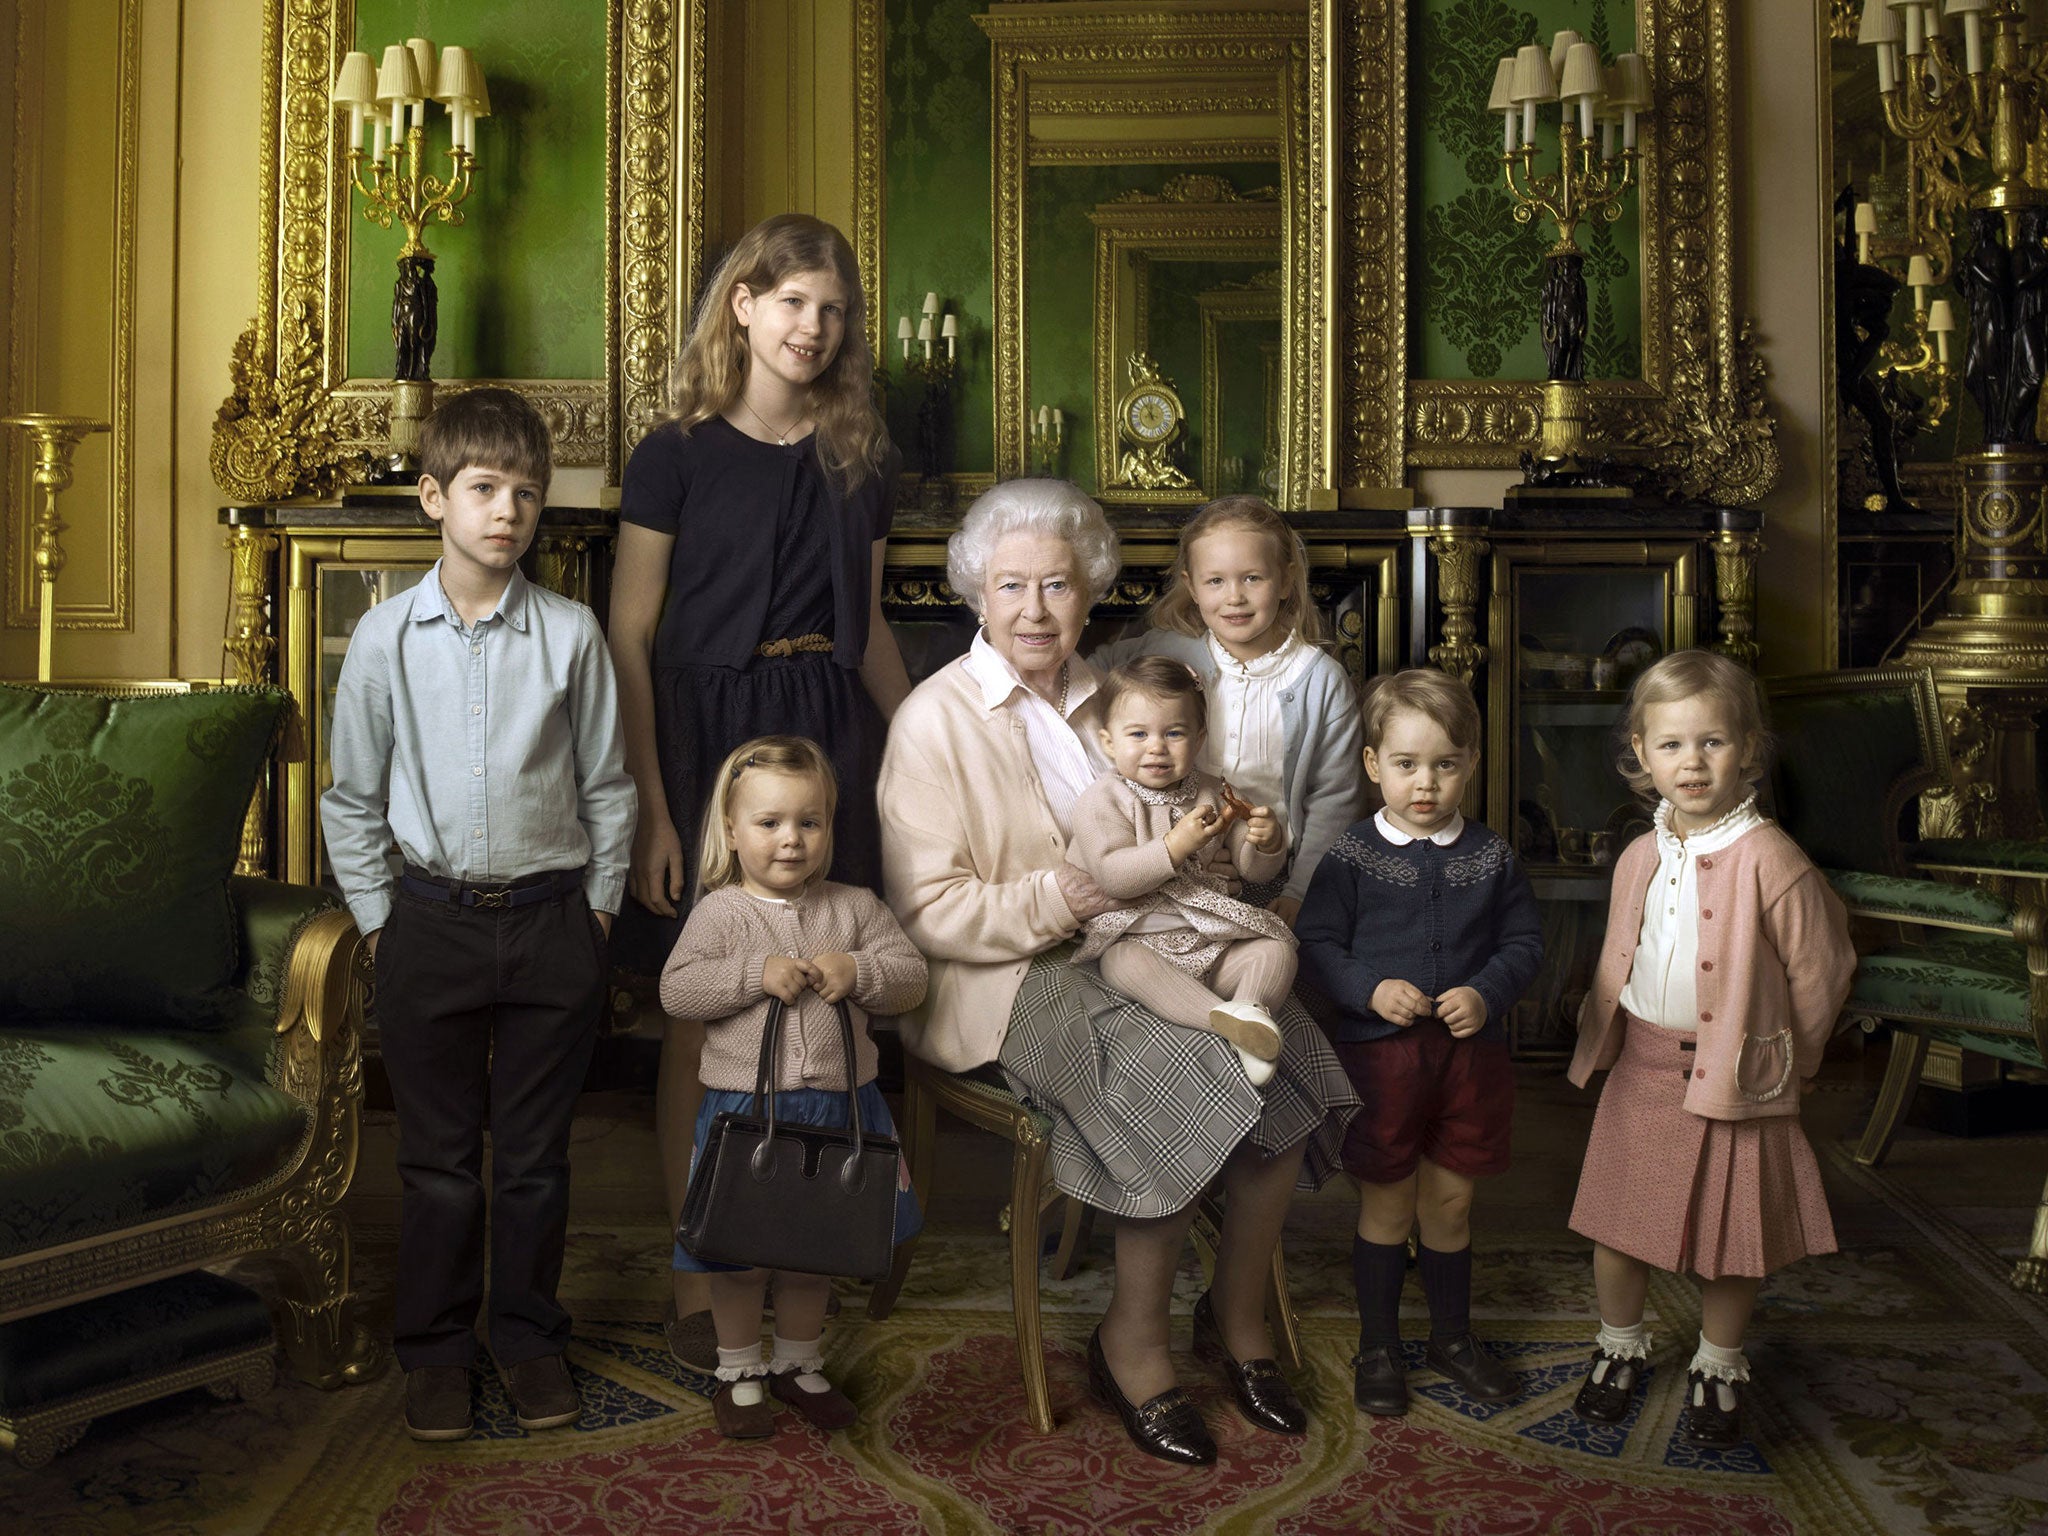 An official photograph, released by Buckingham Palace to mark her 90th birthday, shows Queen Elizabeth II with her five great-grandchildren and her two youngest grandchildren at Windsor Castle